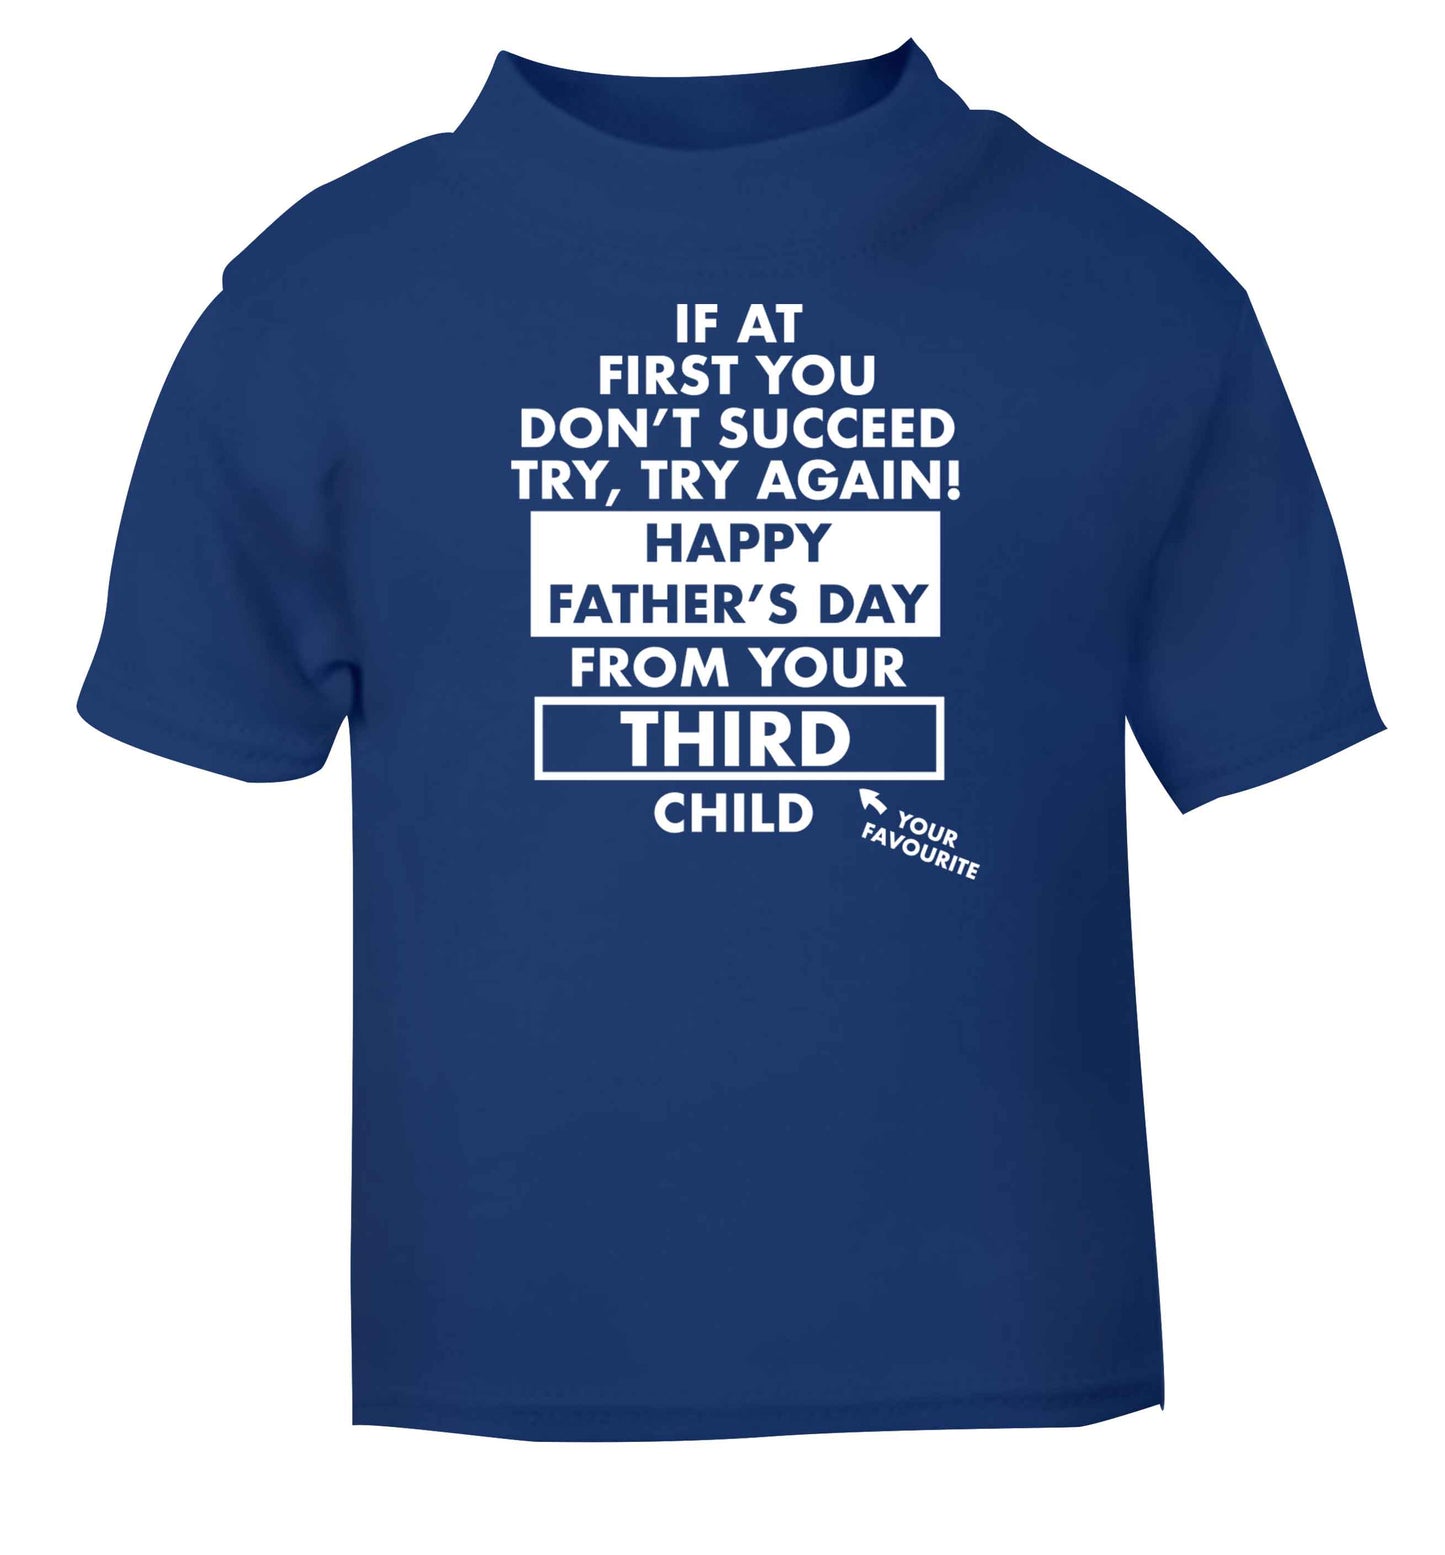 If at first you don't succeed try, try again Happy Father's day from your third child! blue baby toddler Tshirt 2 Years